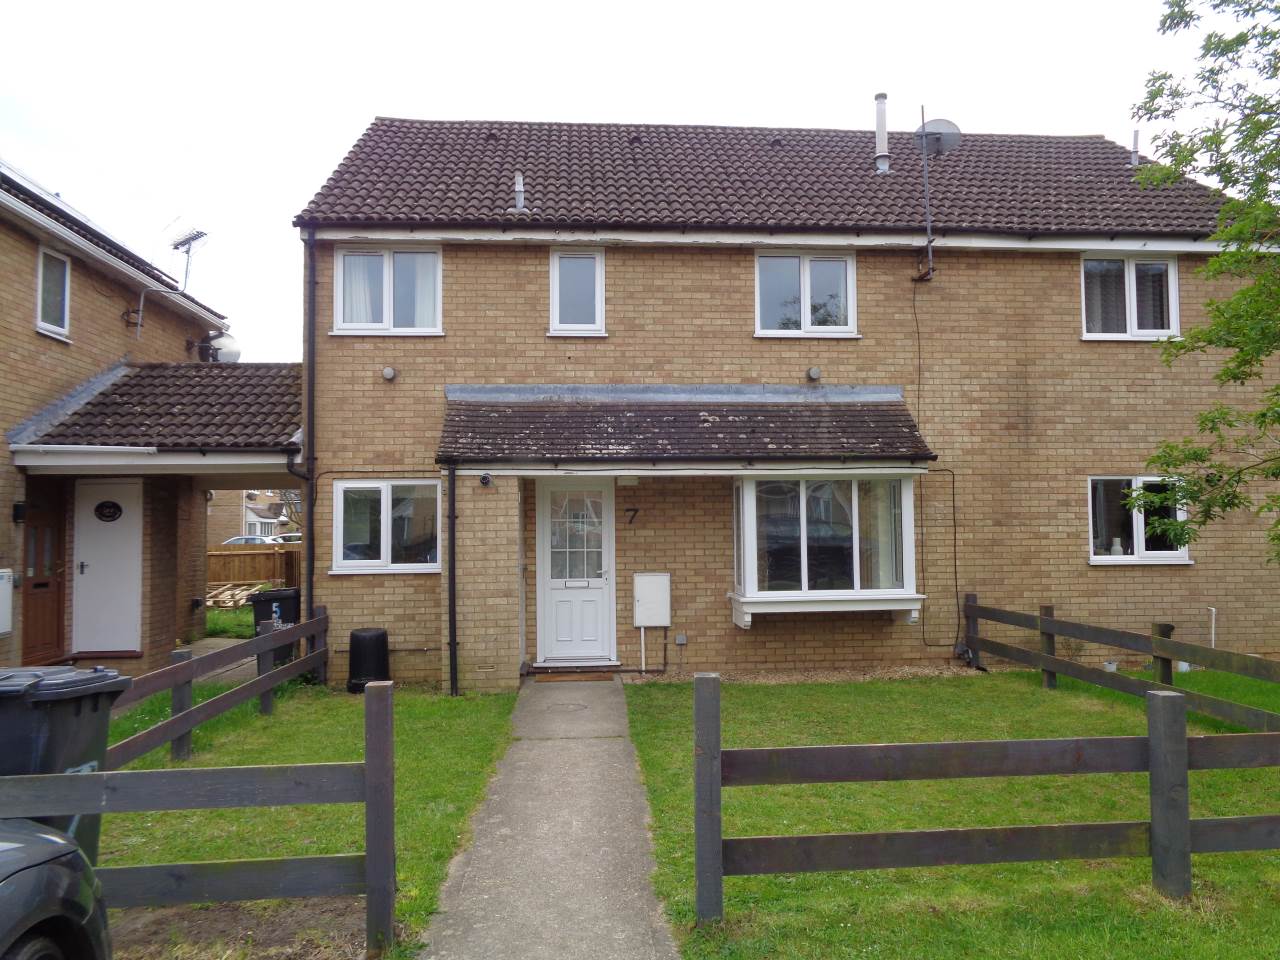 2 bed House (unspecified) for rent in Milton. From Lets Rent Cambridge